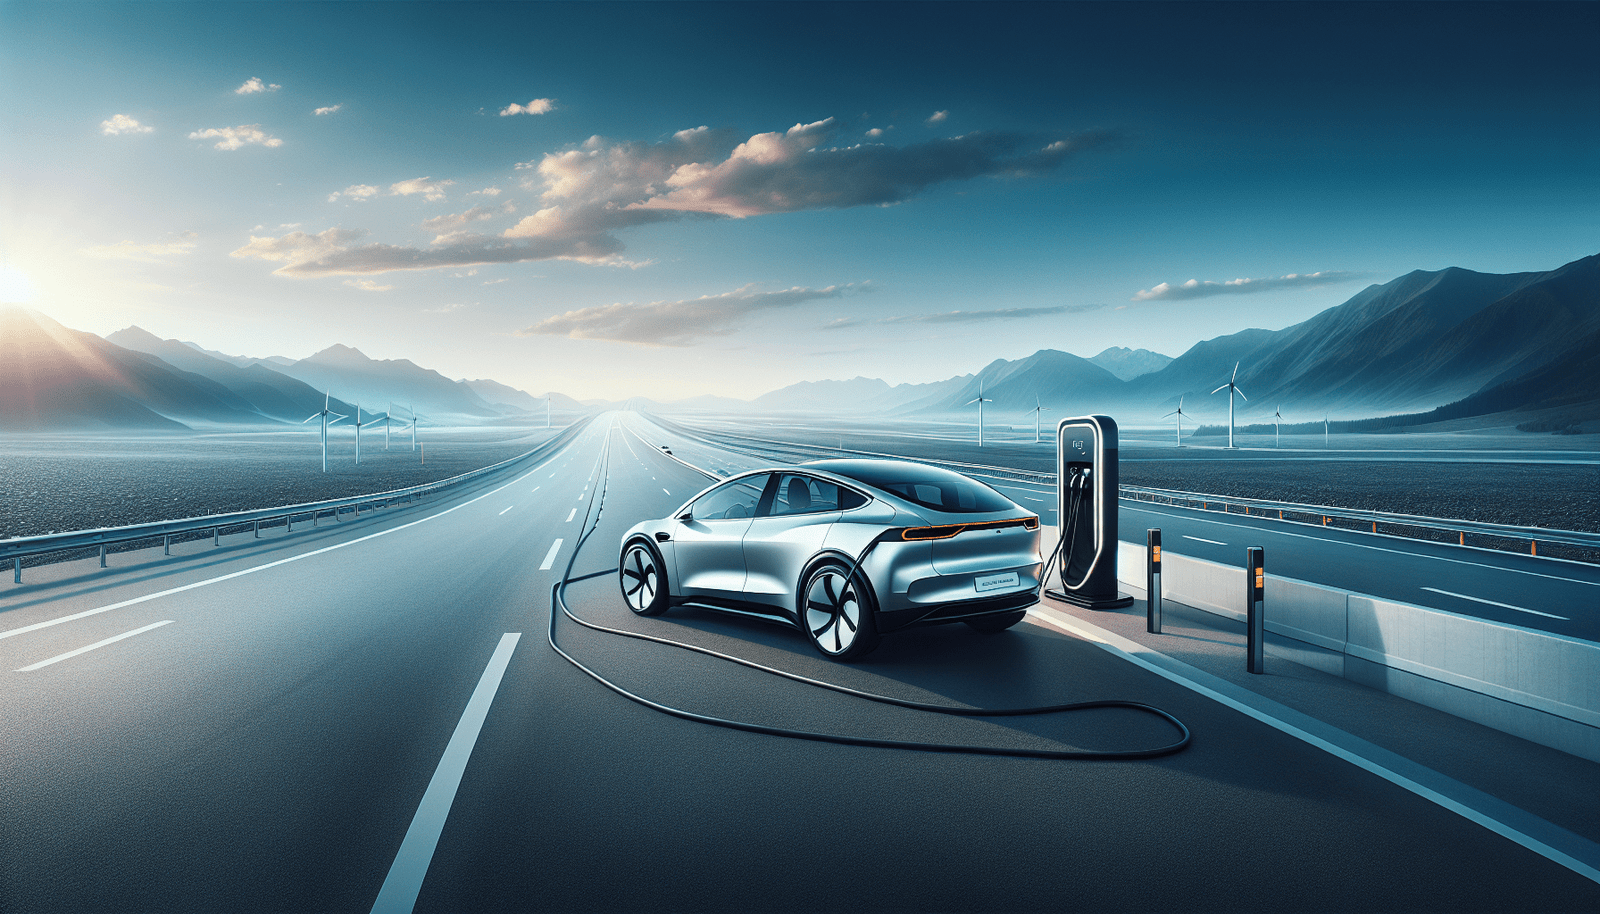 How Do Electric Vehicle Owners Find Reliable Charging Stations During Long Journeys?